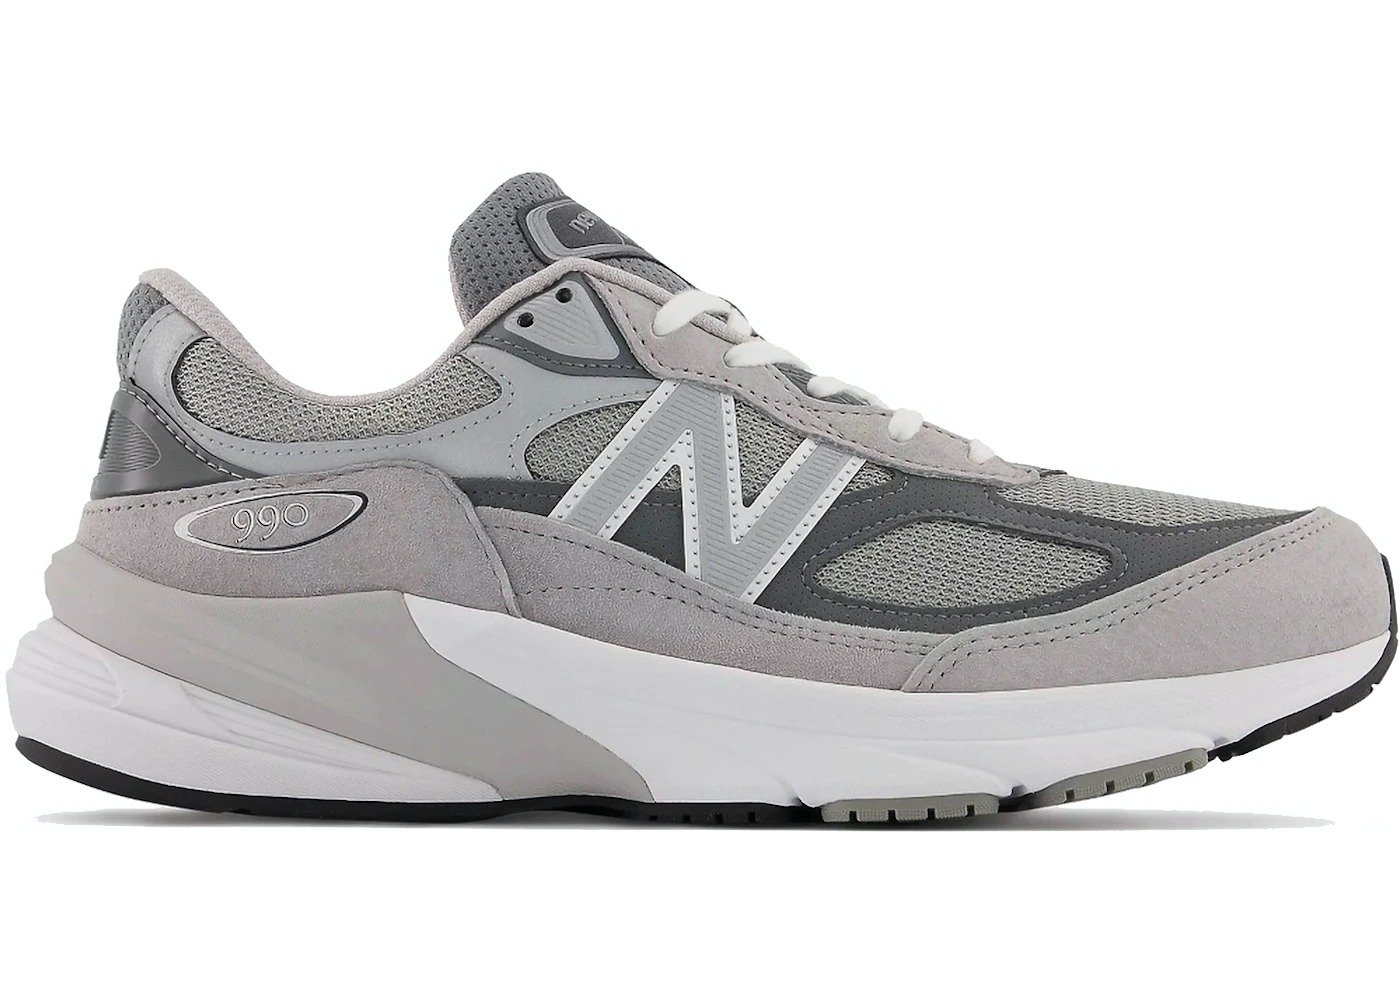 Now Available: New Balance 990v6 